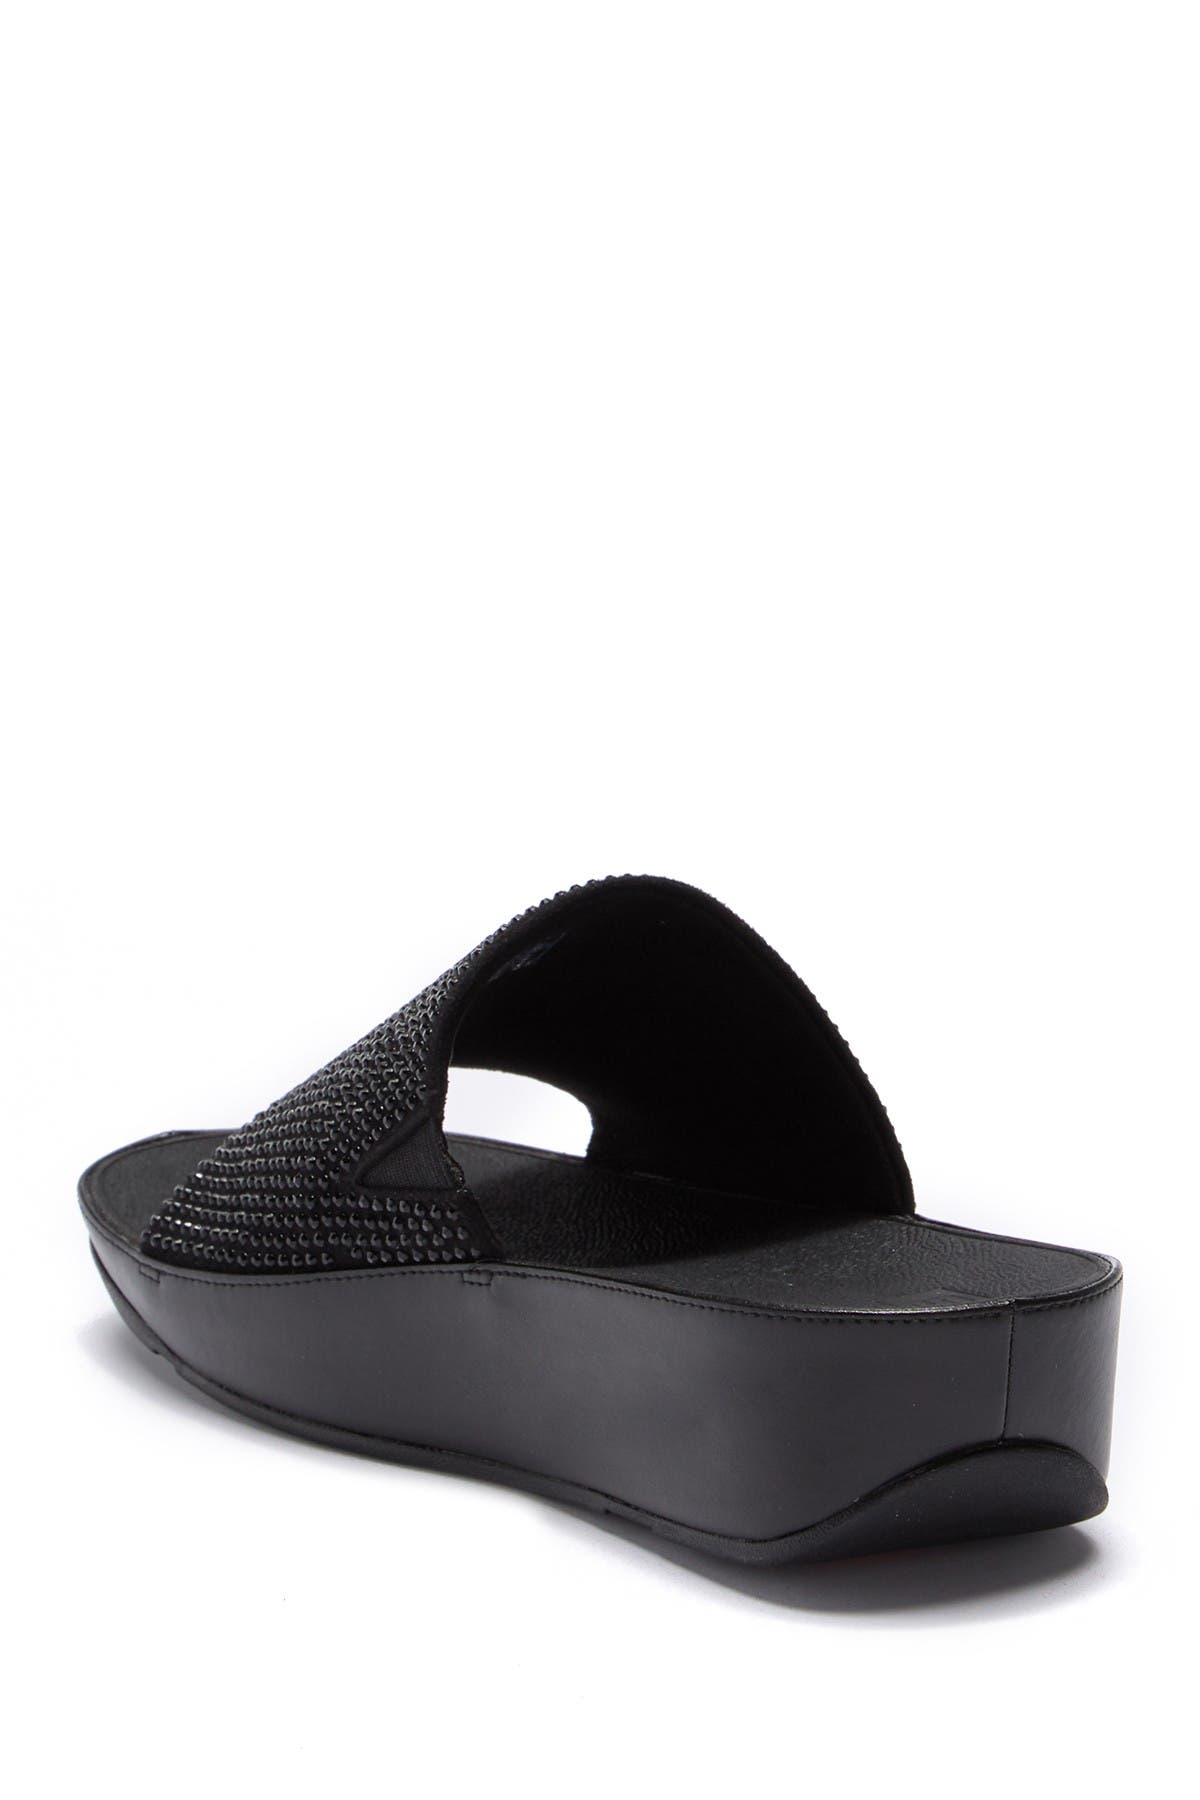 fitflop ginny